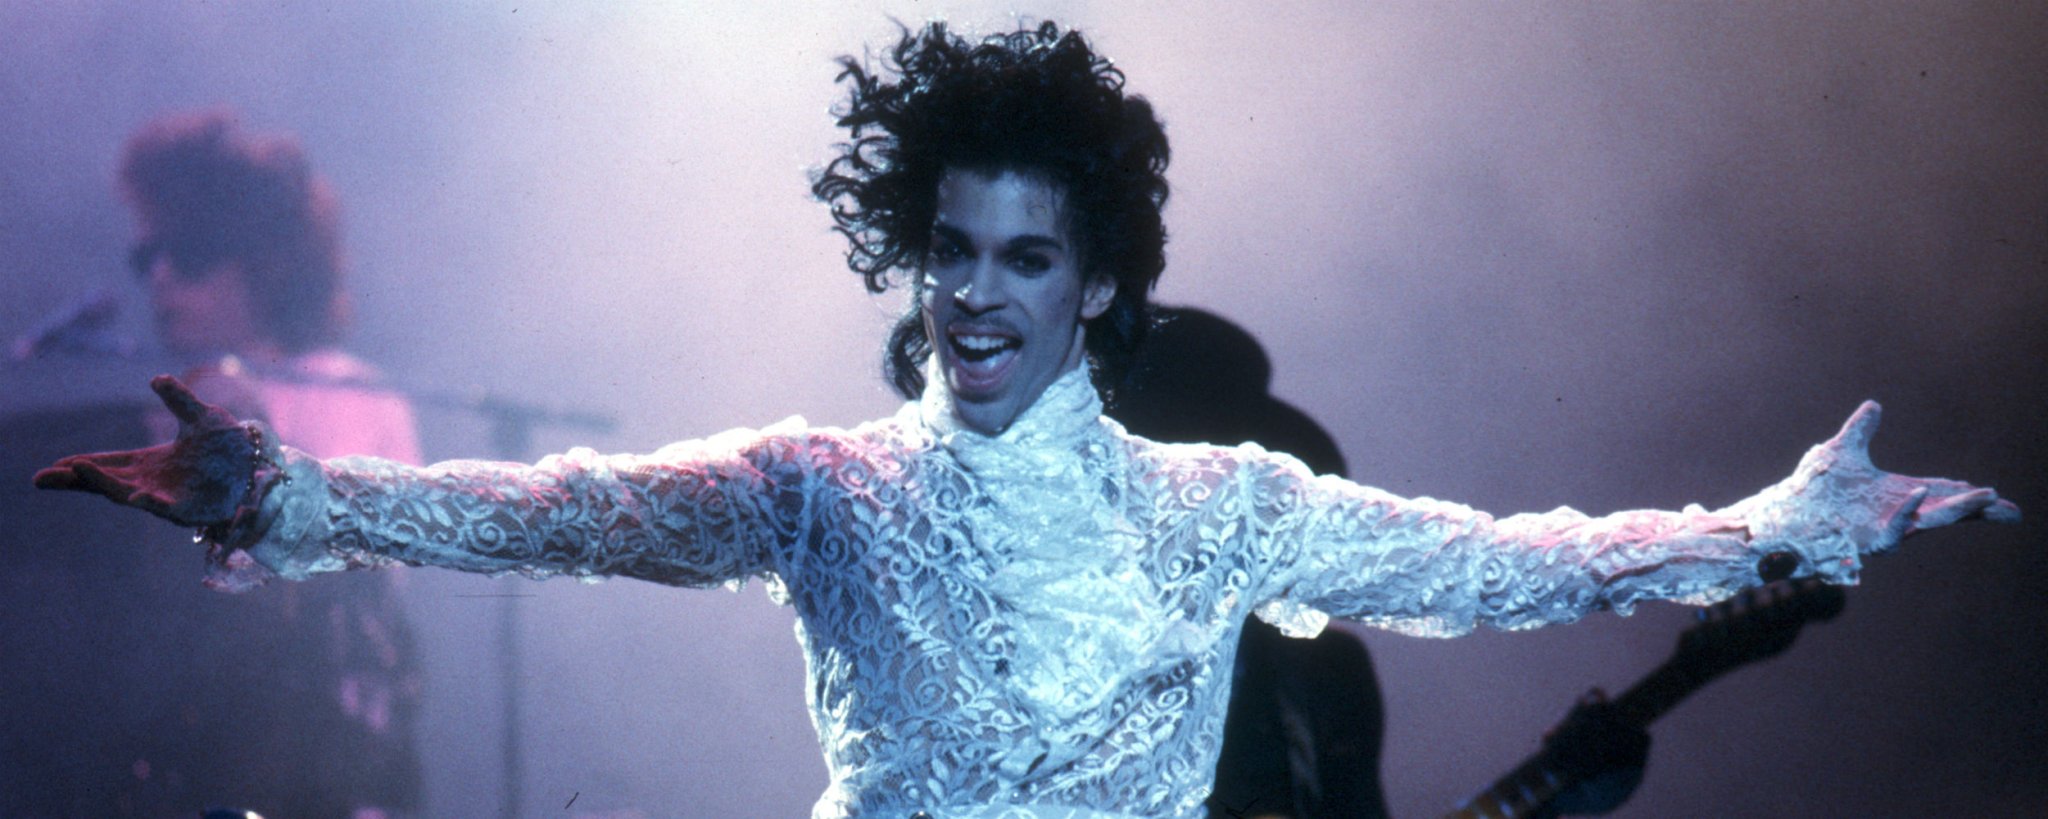 The 15 Most Controversial Songs of All-Time